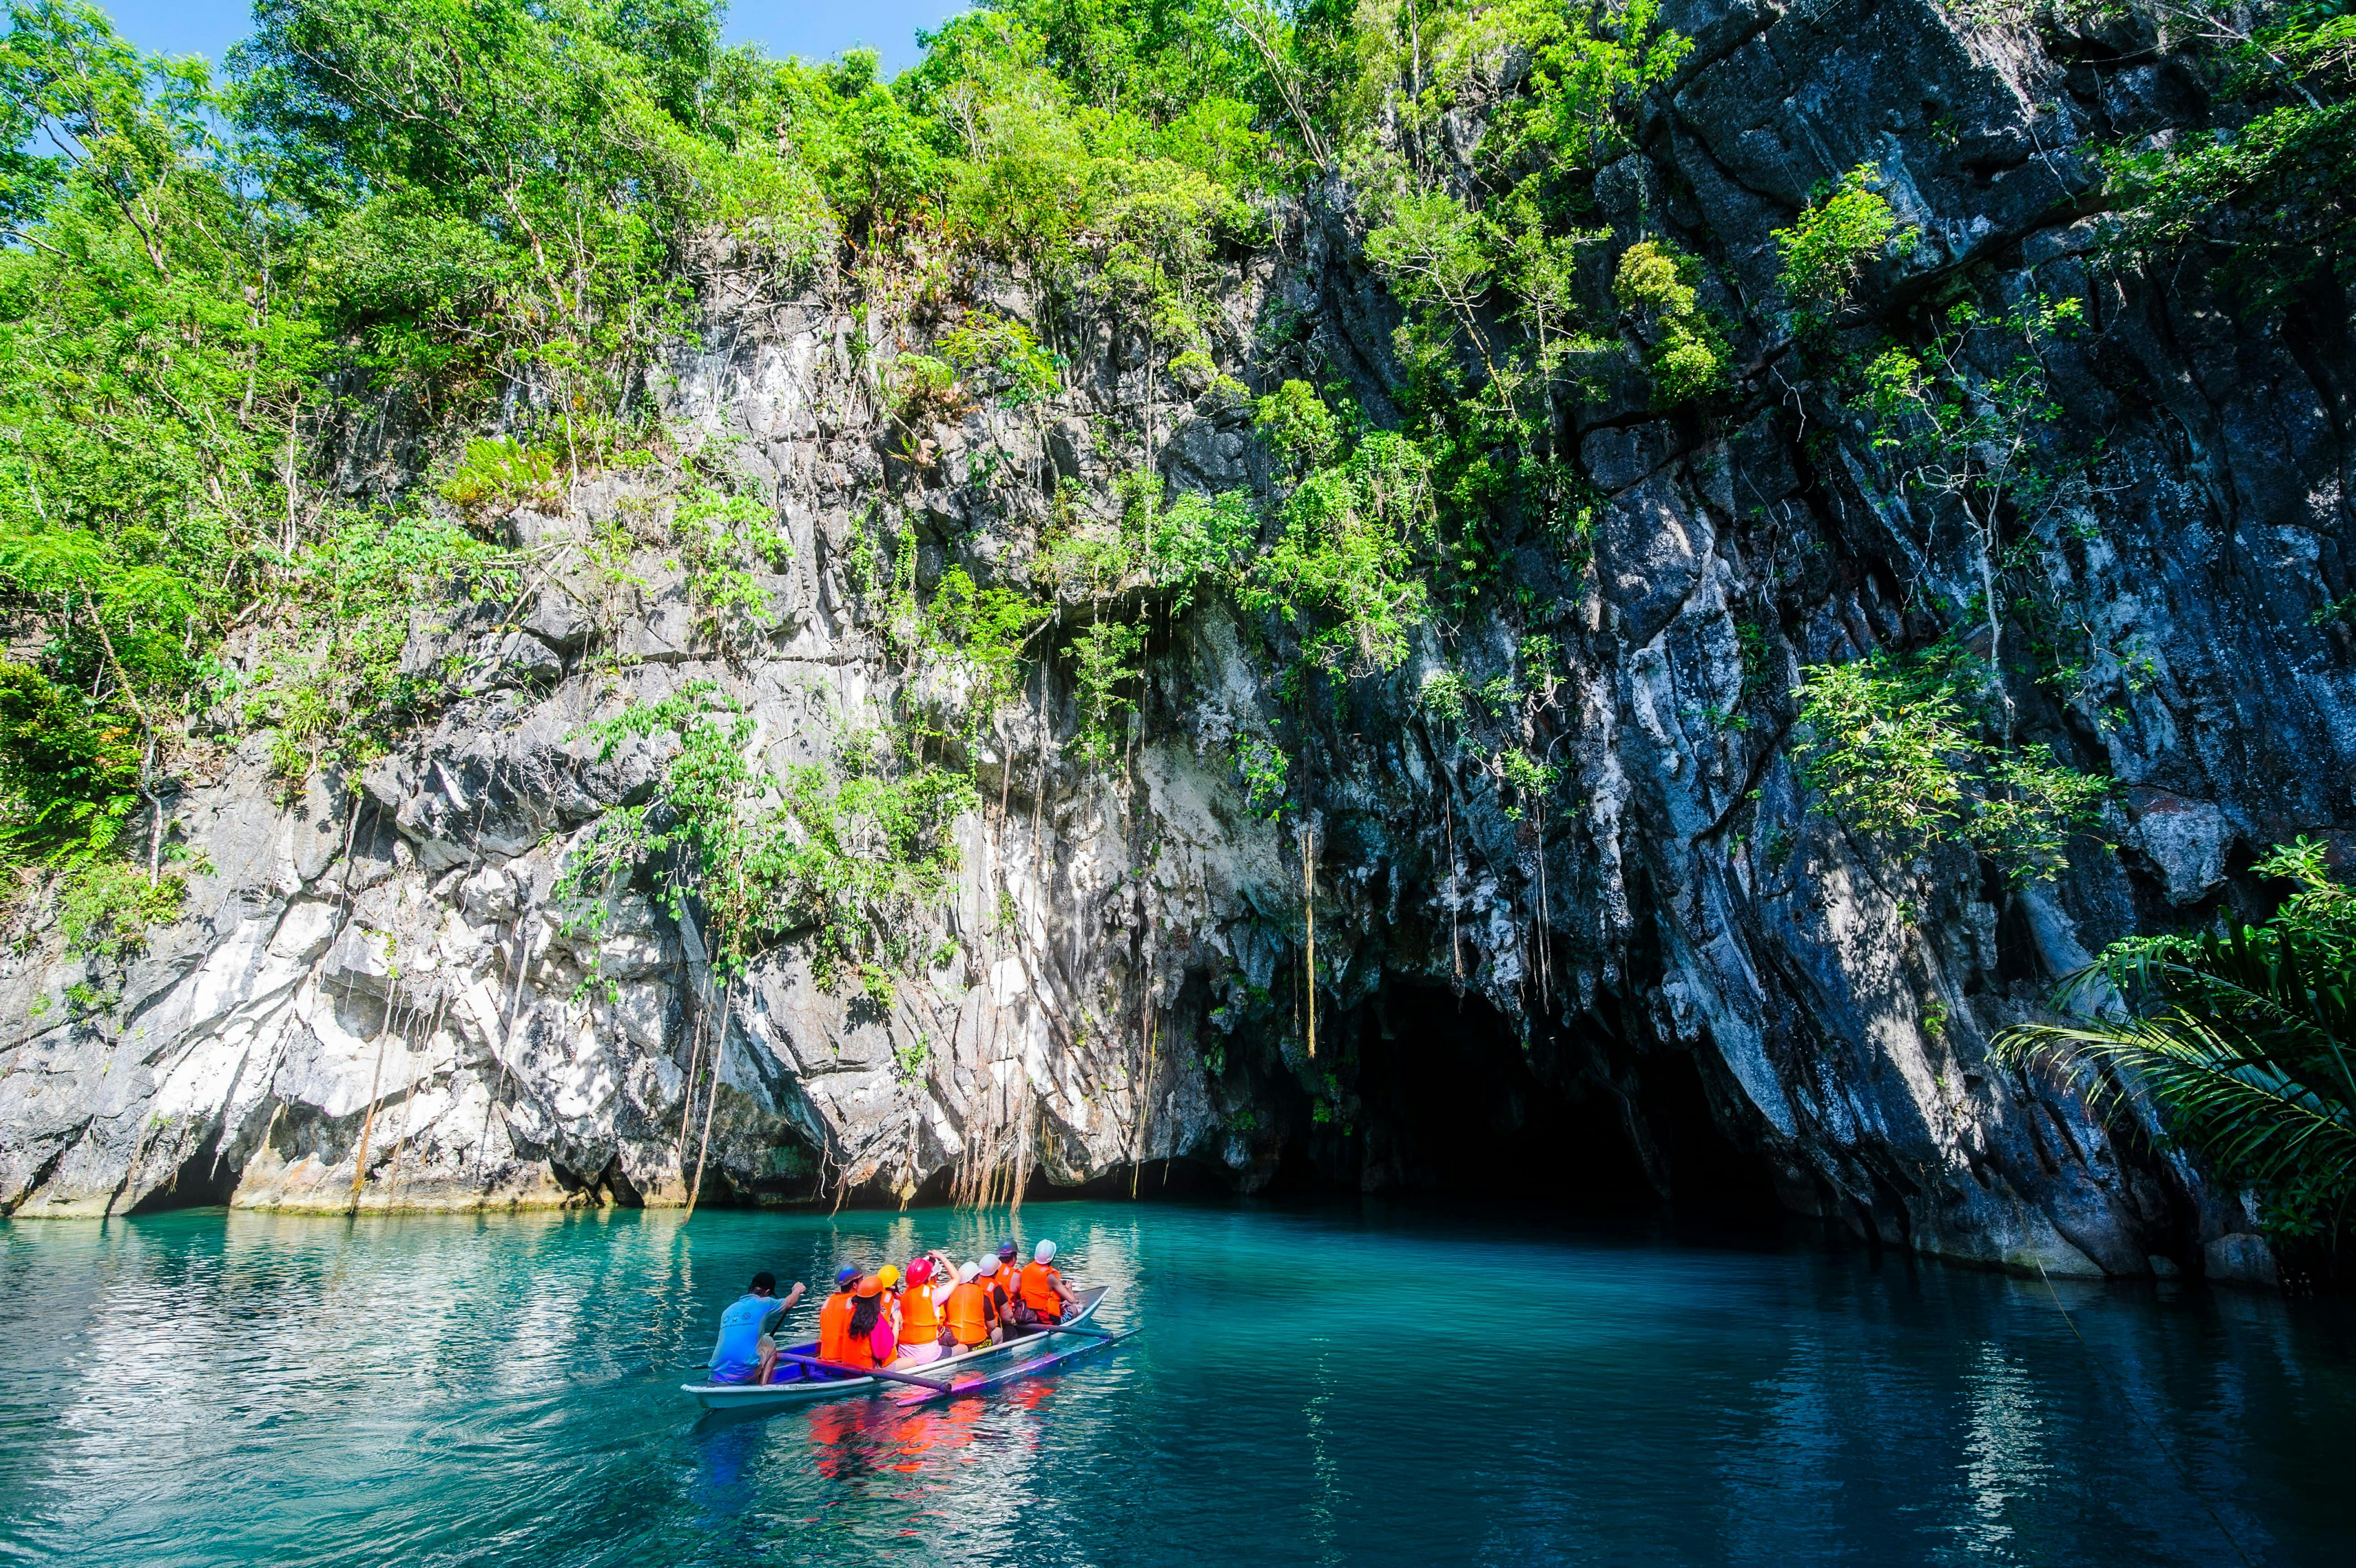 The Puerto Princesa Underground River is one of the most popular tours in Palawan